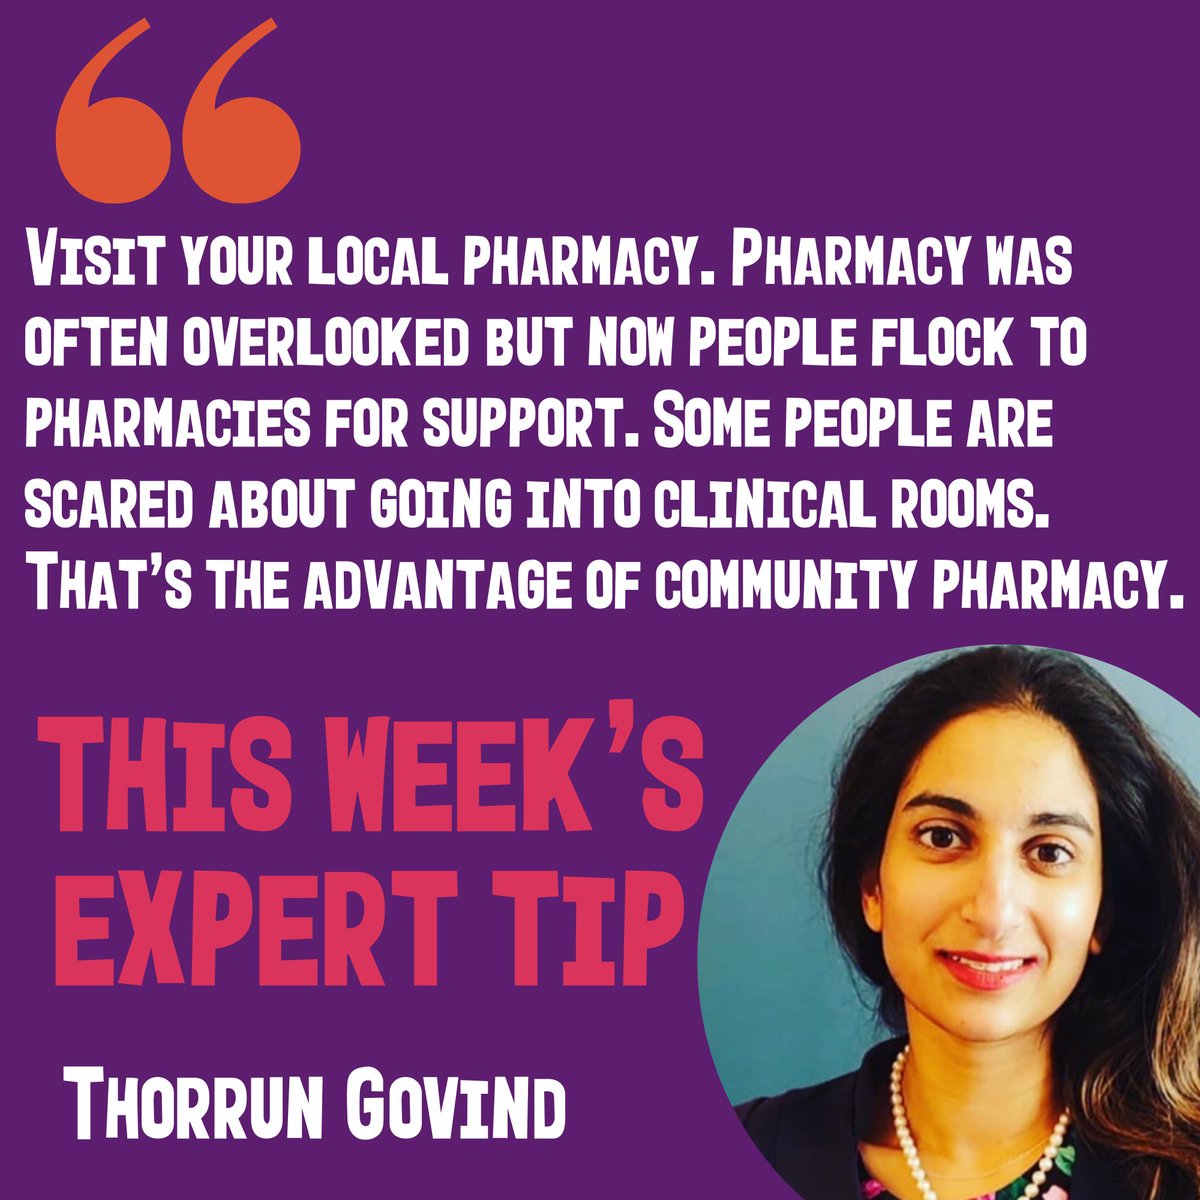 Thorrun Govind @pharmthorrun is a TV #pharmacist and healthcare lawyer. Thank you for that great advice, and reminding us there is support available in our local communities. We don’t always need to visit the GP. #MenopauseMandate #Menopause #communitypharmacy #pharmacy